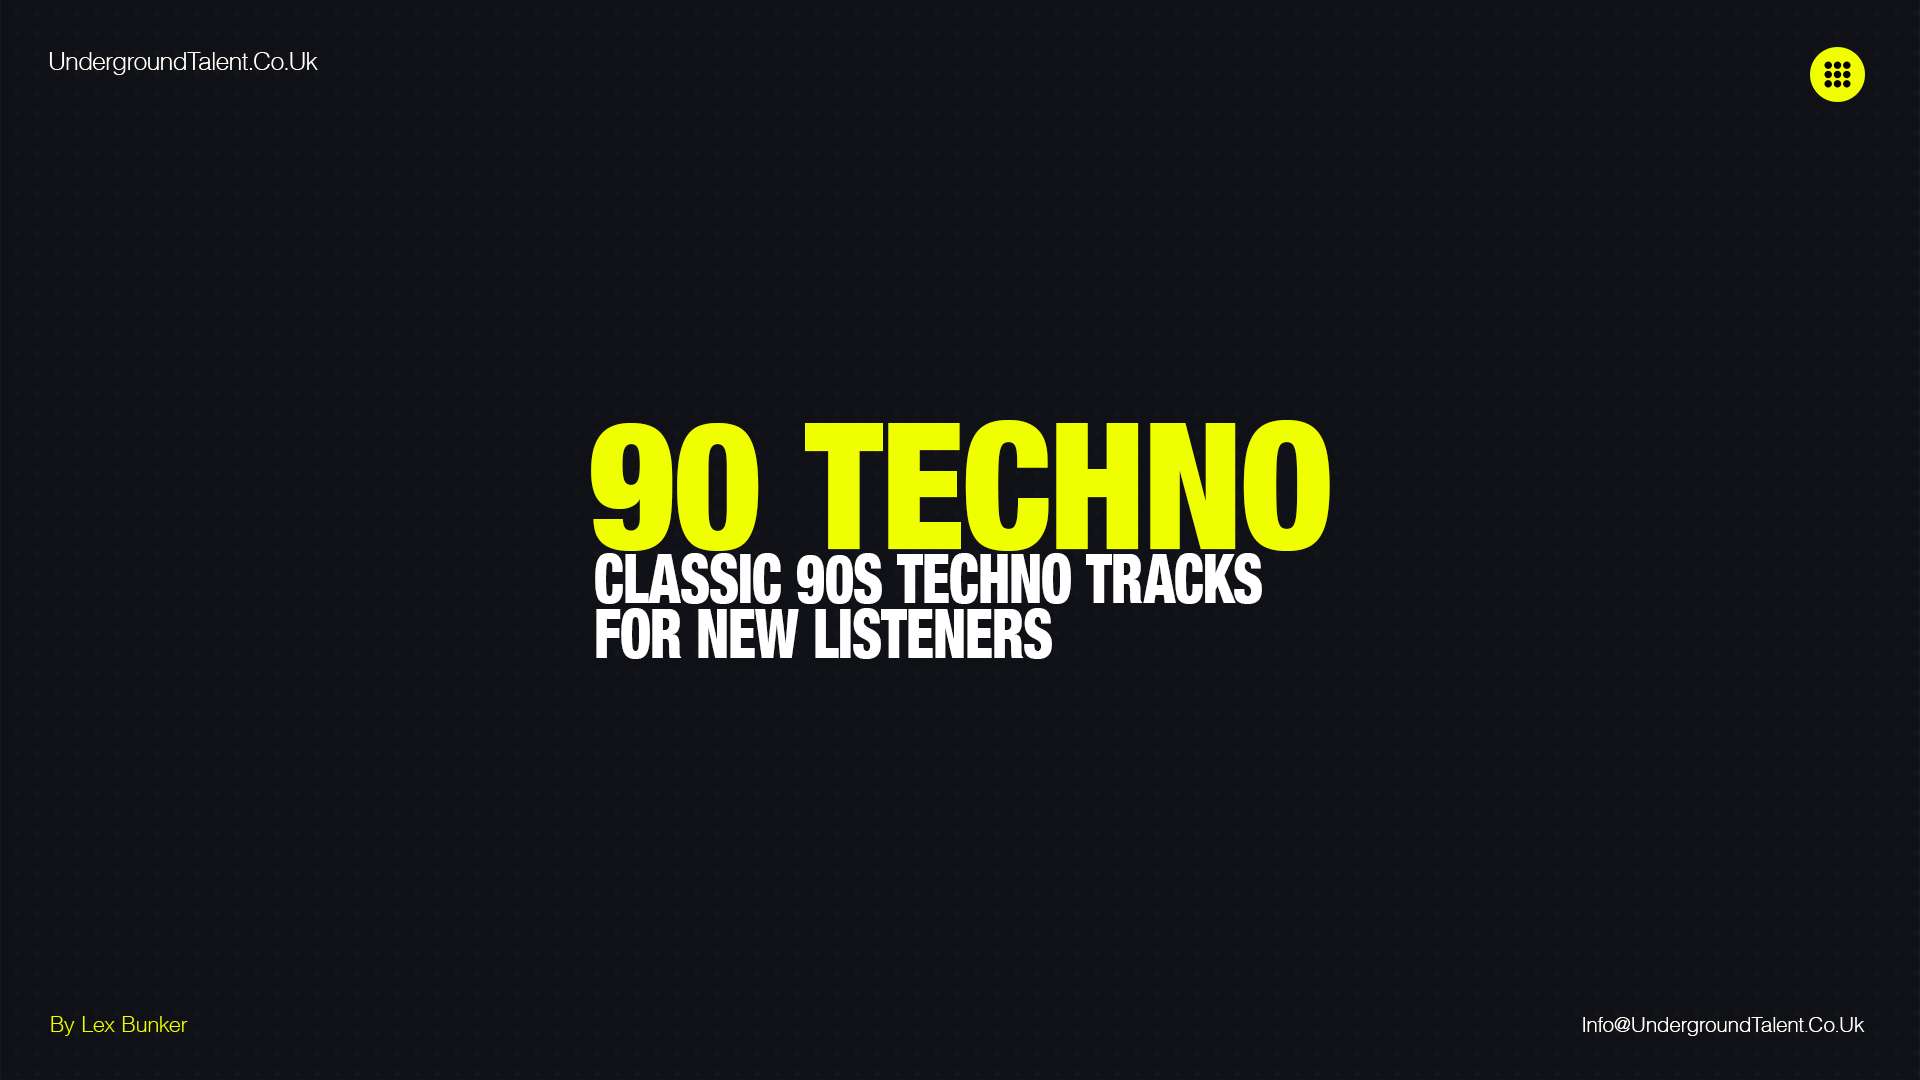 90 Techno: Classic 90s Techno Songs for New Listeners